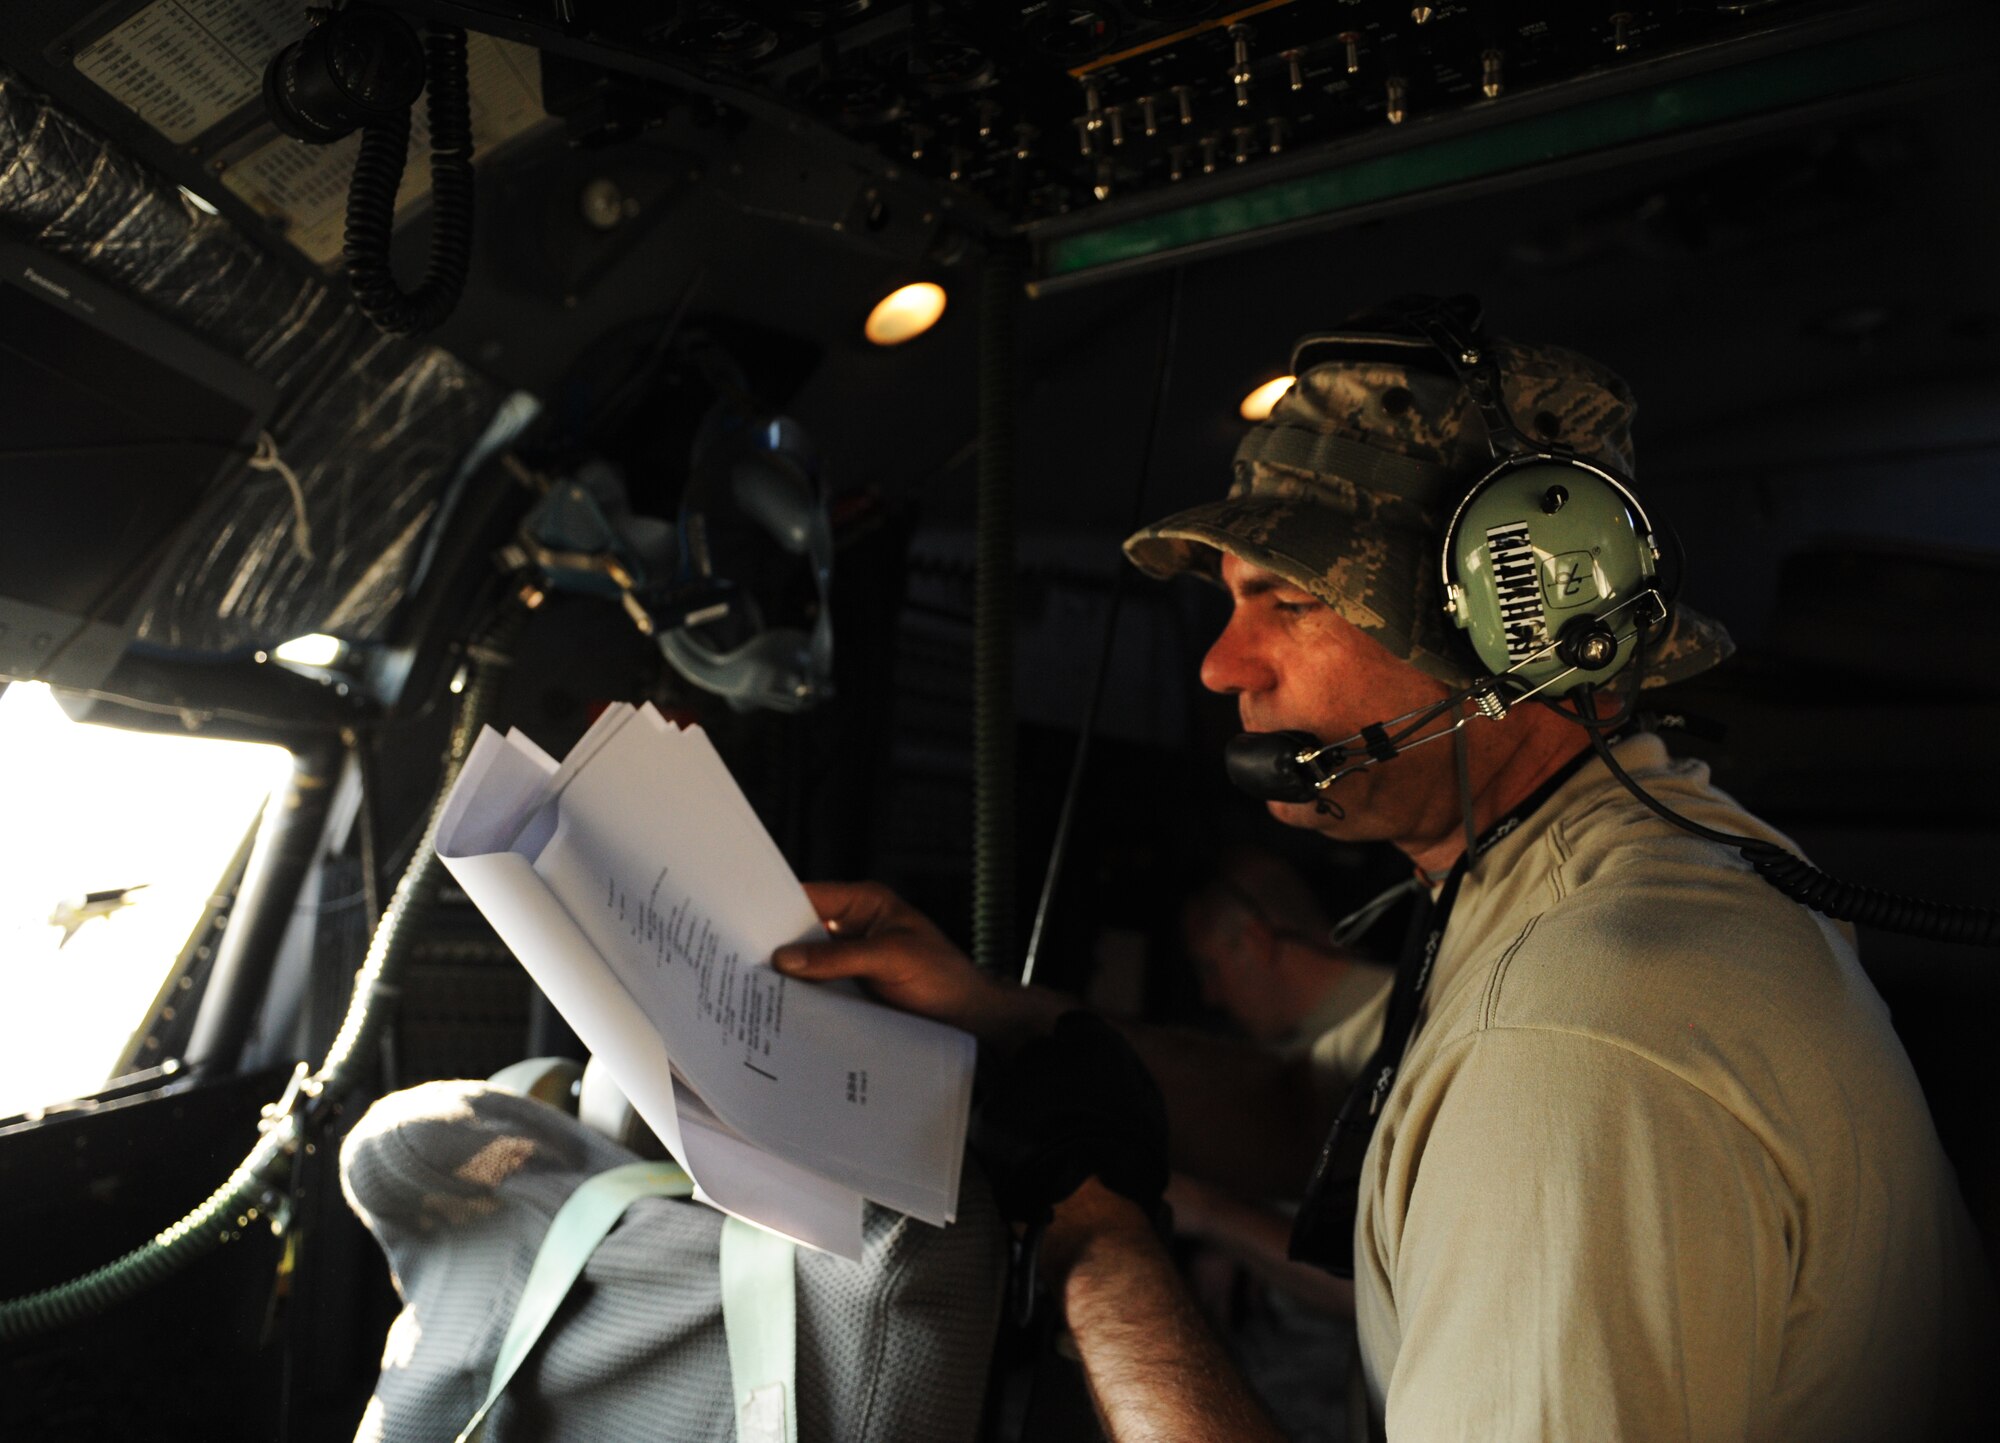 SOUTHWEST ASIA – Senior Airman Andy Schmitz, 746th Expeditionary Aircraft Maintenance Unit electrical and environmental systems specialist and native of Minneapolis, looks over an inspection document inside the cockpit of a C-130H3 Hercules during a home station check here Feb. 28, 2012. In addition to technical orders, which tells maintainers how to specifically perform maintenance on the aircraft, the inspection document specifies what items must be inspected during the home station check. (U.S. Air Force photo/Staff Sgt. Nathanael Callon)